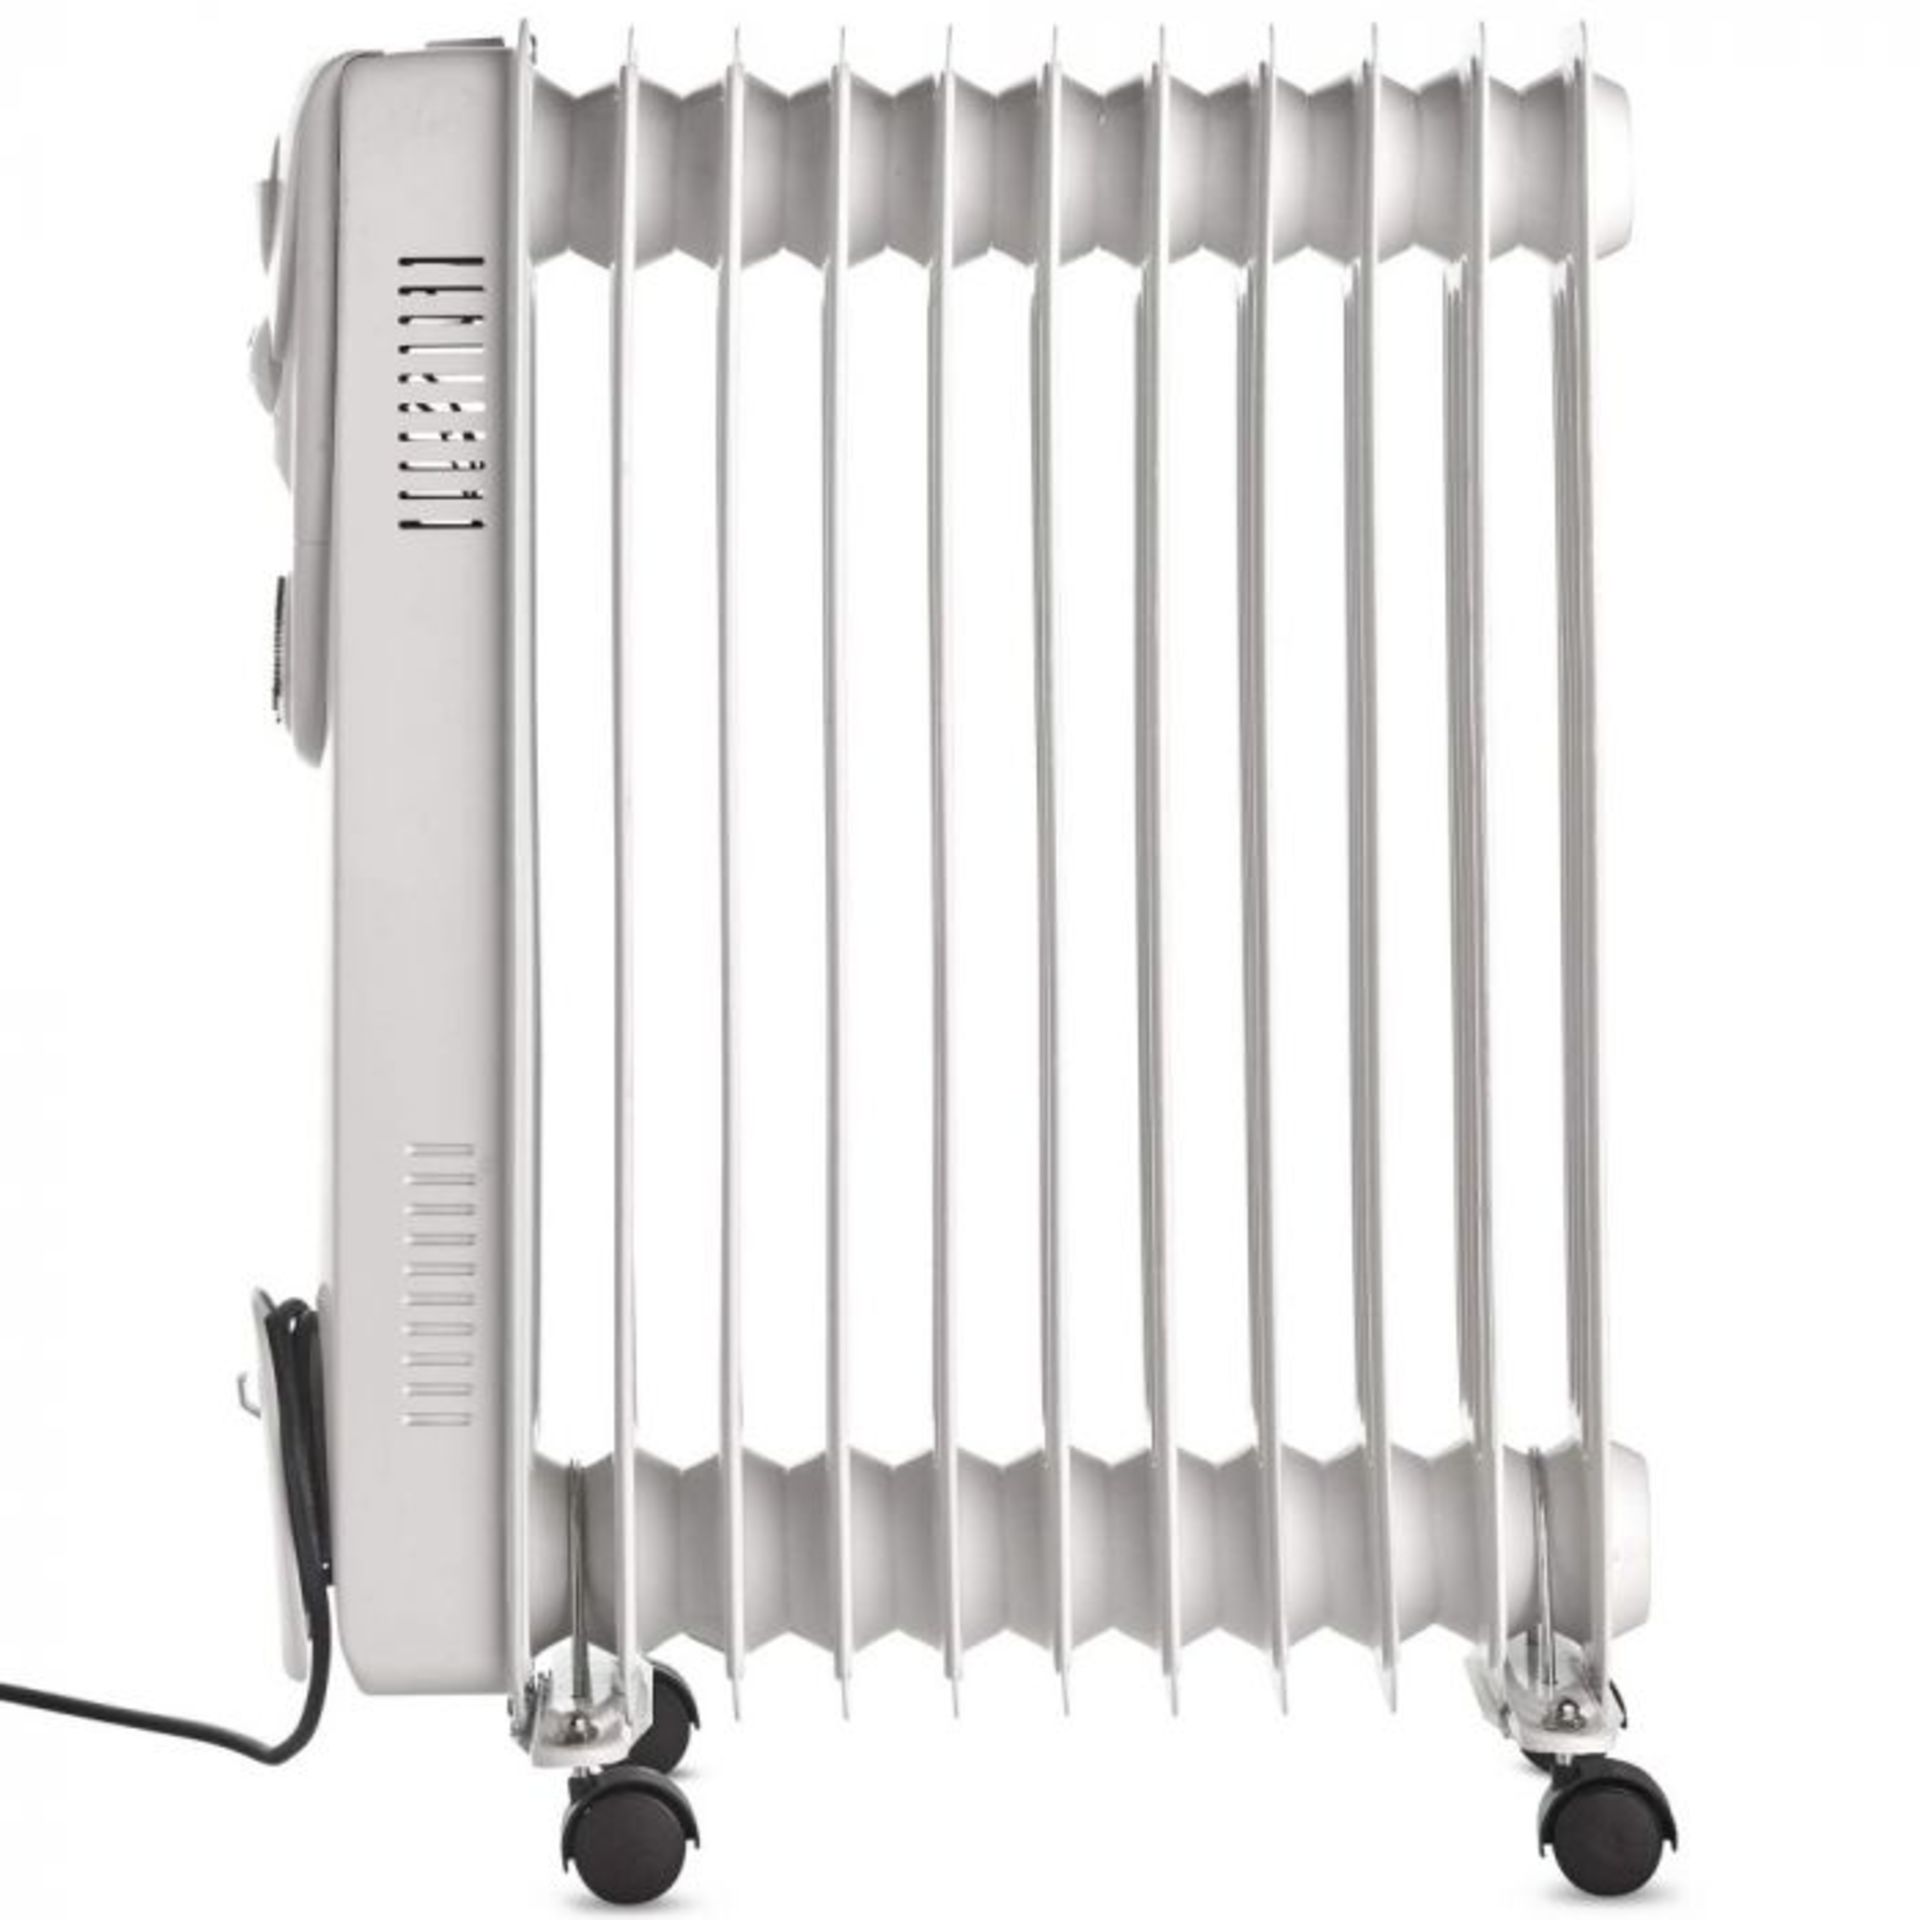 (V62) 11 Fin 2500W Oil Filled Radiator - White Suitable for areas up to 28 square metres 3 po... - Image 3 of 3